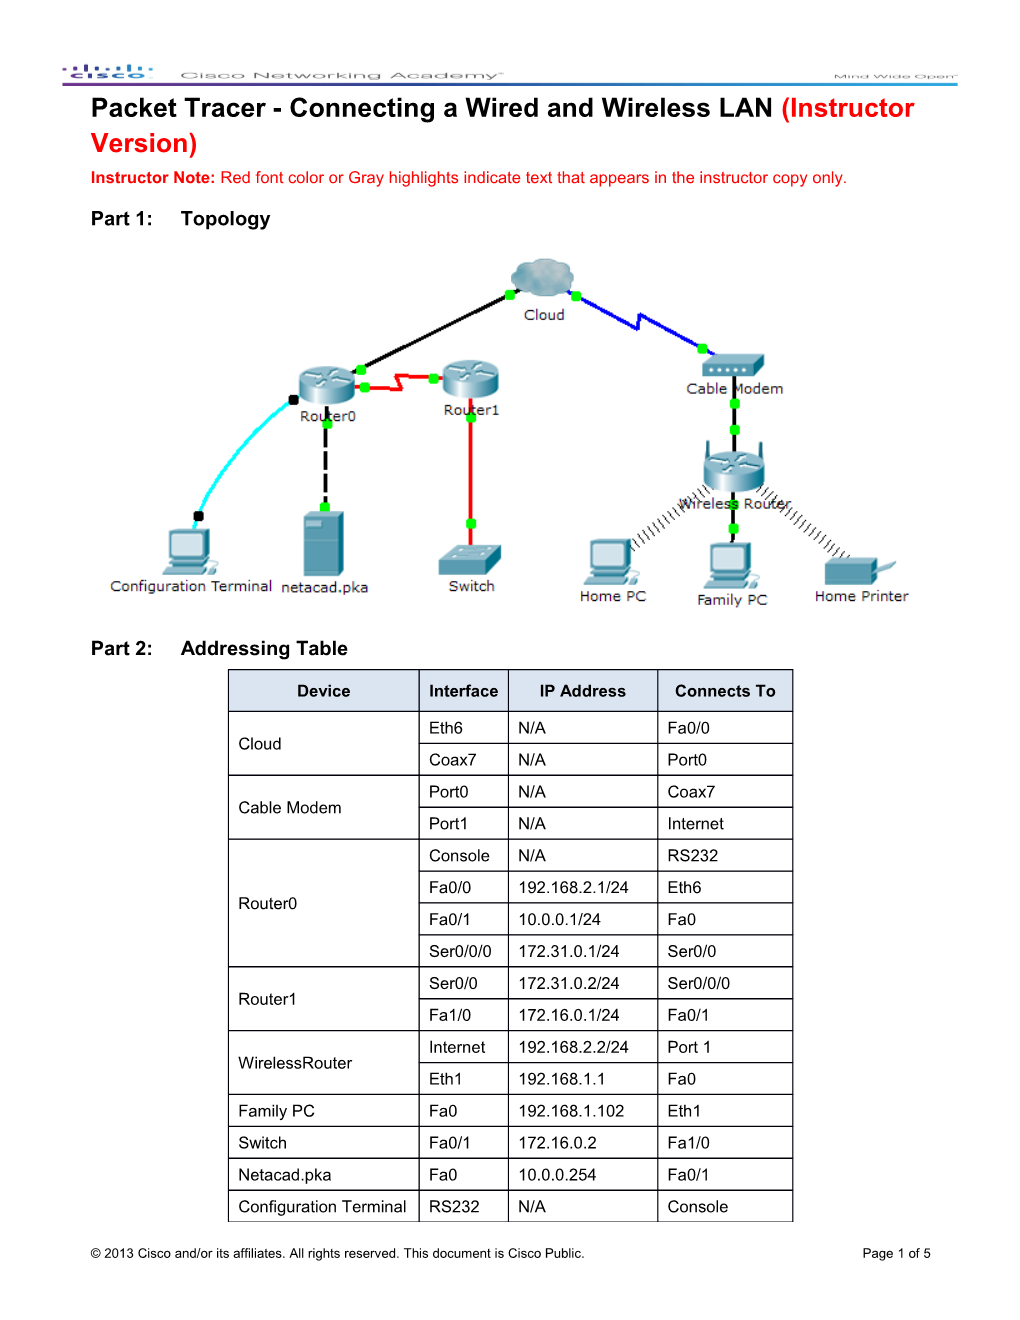 Packet Tracer - Connecting a Wired and Wireless LAN